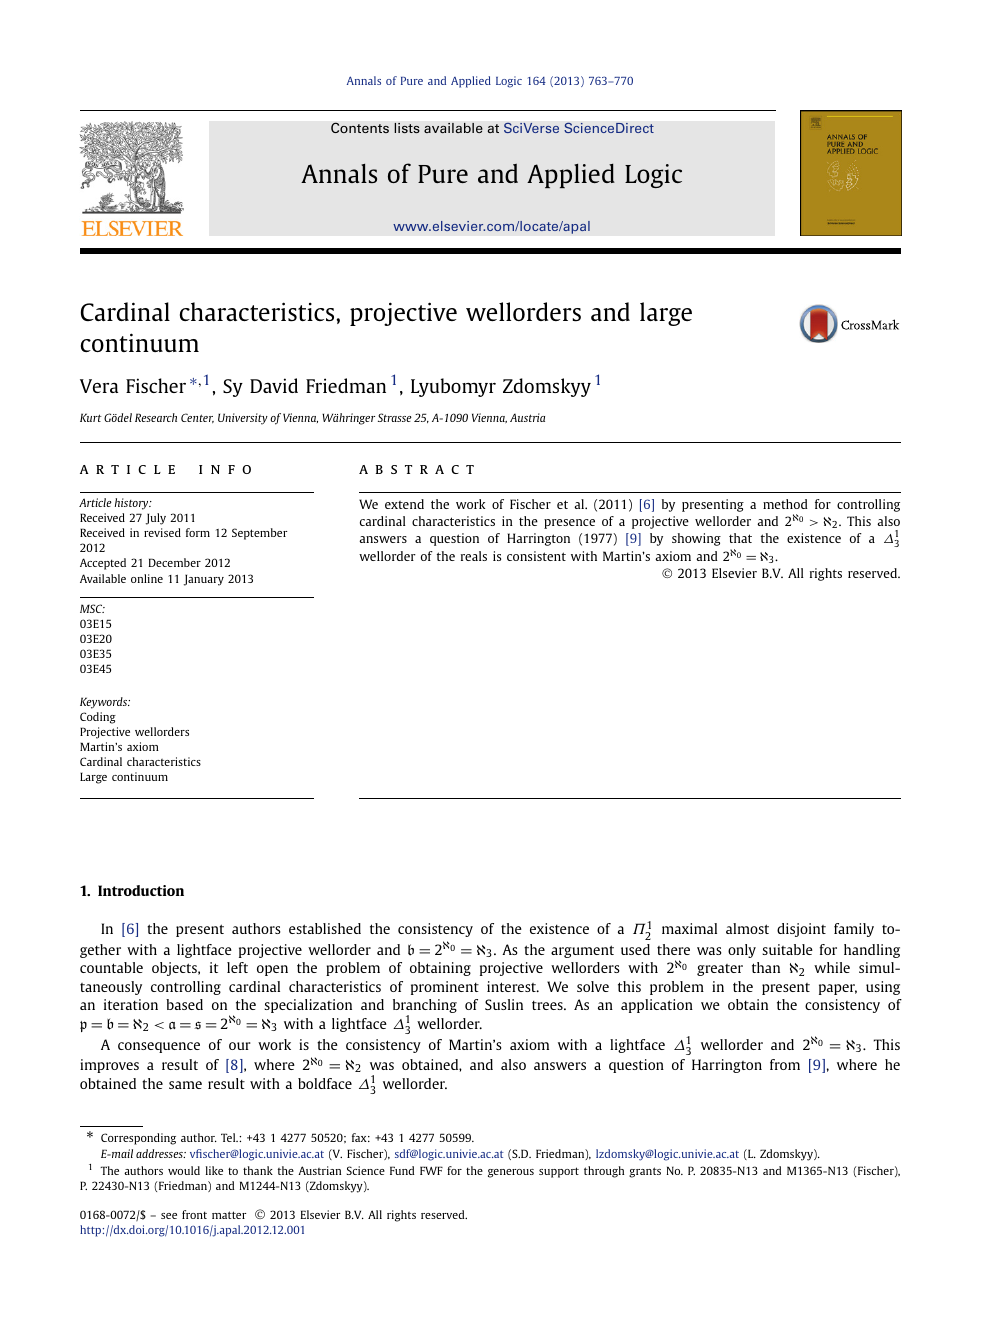 Cardinal Characteristics Projective Wellorders And Large Continuum Topic Of Research Paper In Mathematics Download Scholarly Article Pdf And Read For Free On Cyberleninka Open Science Hub